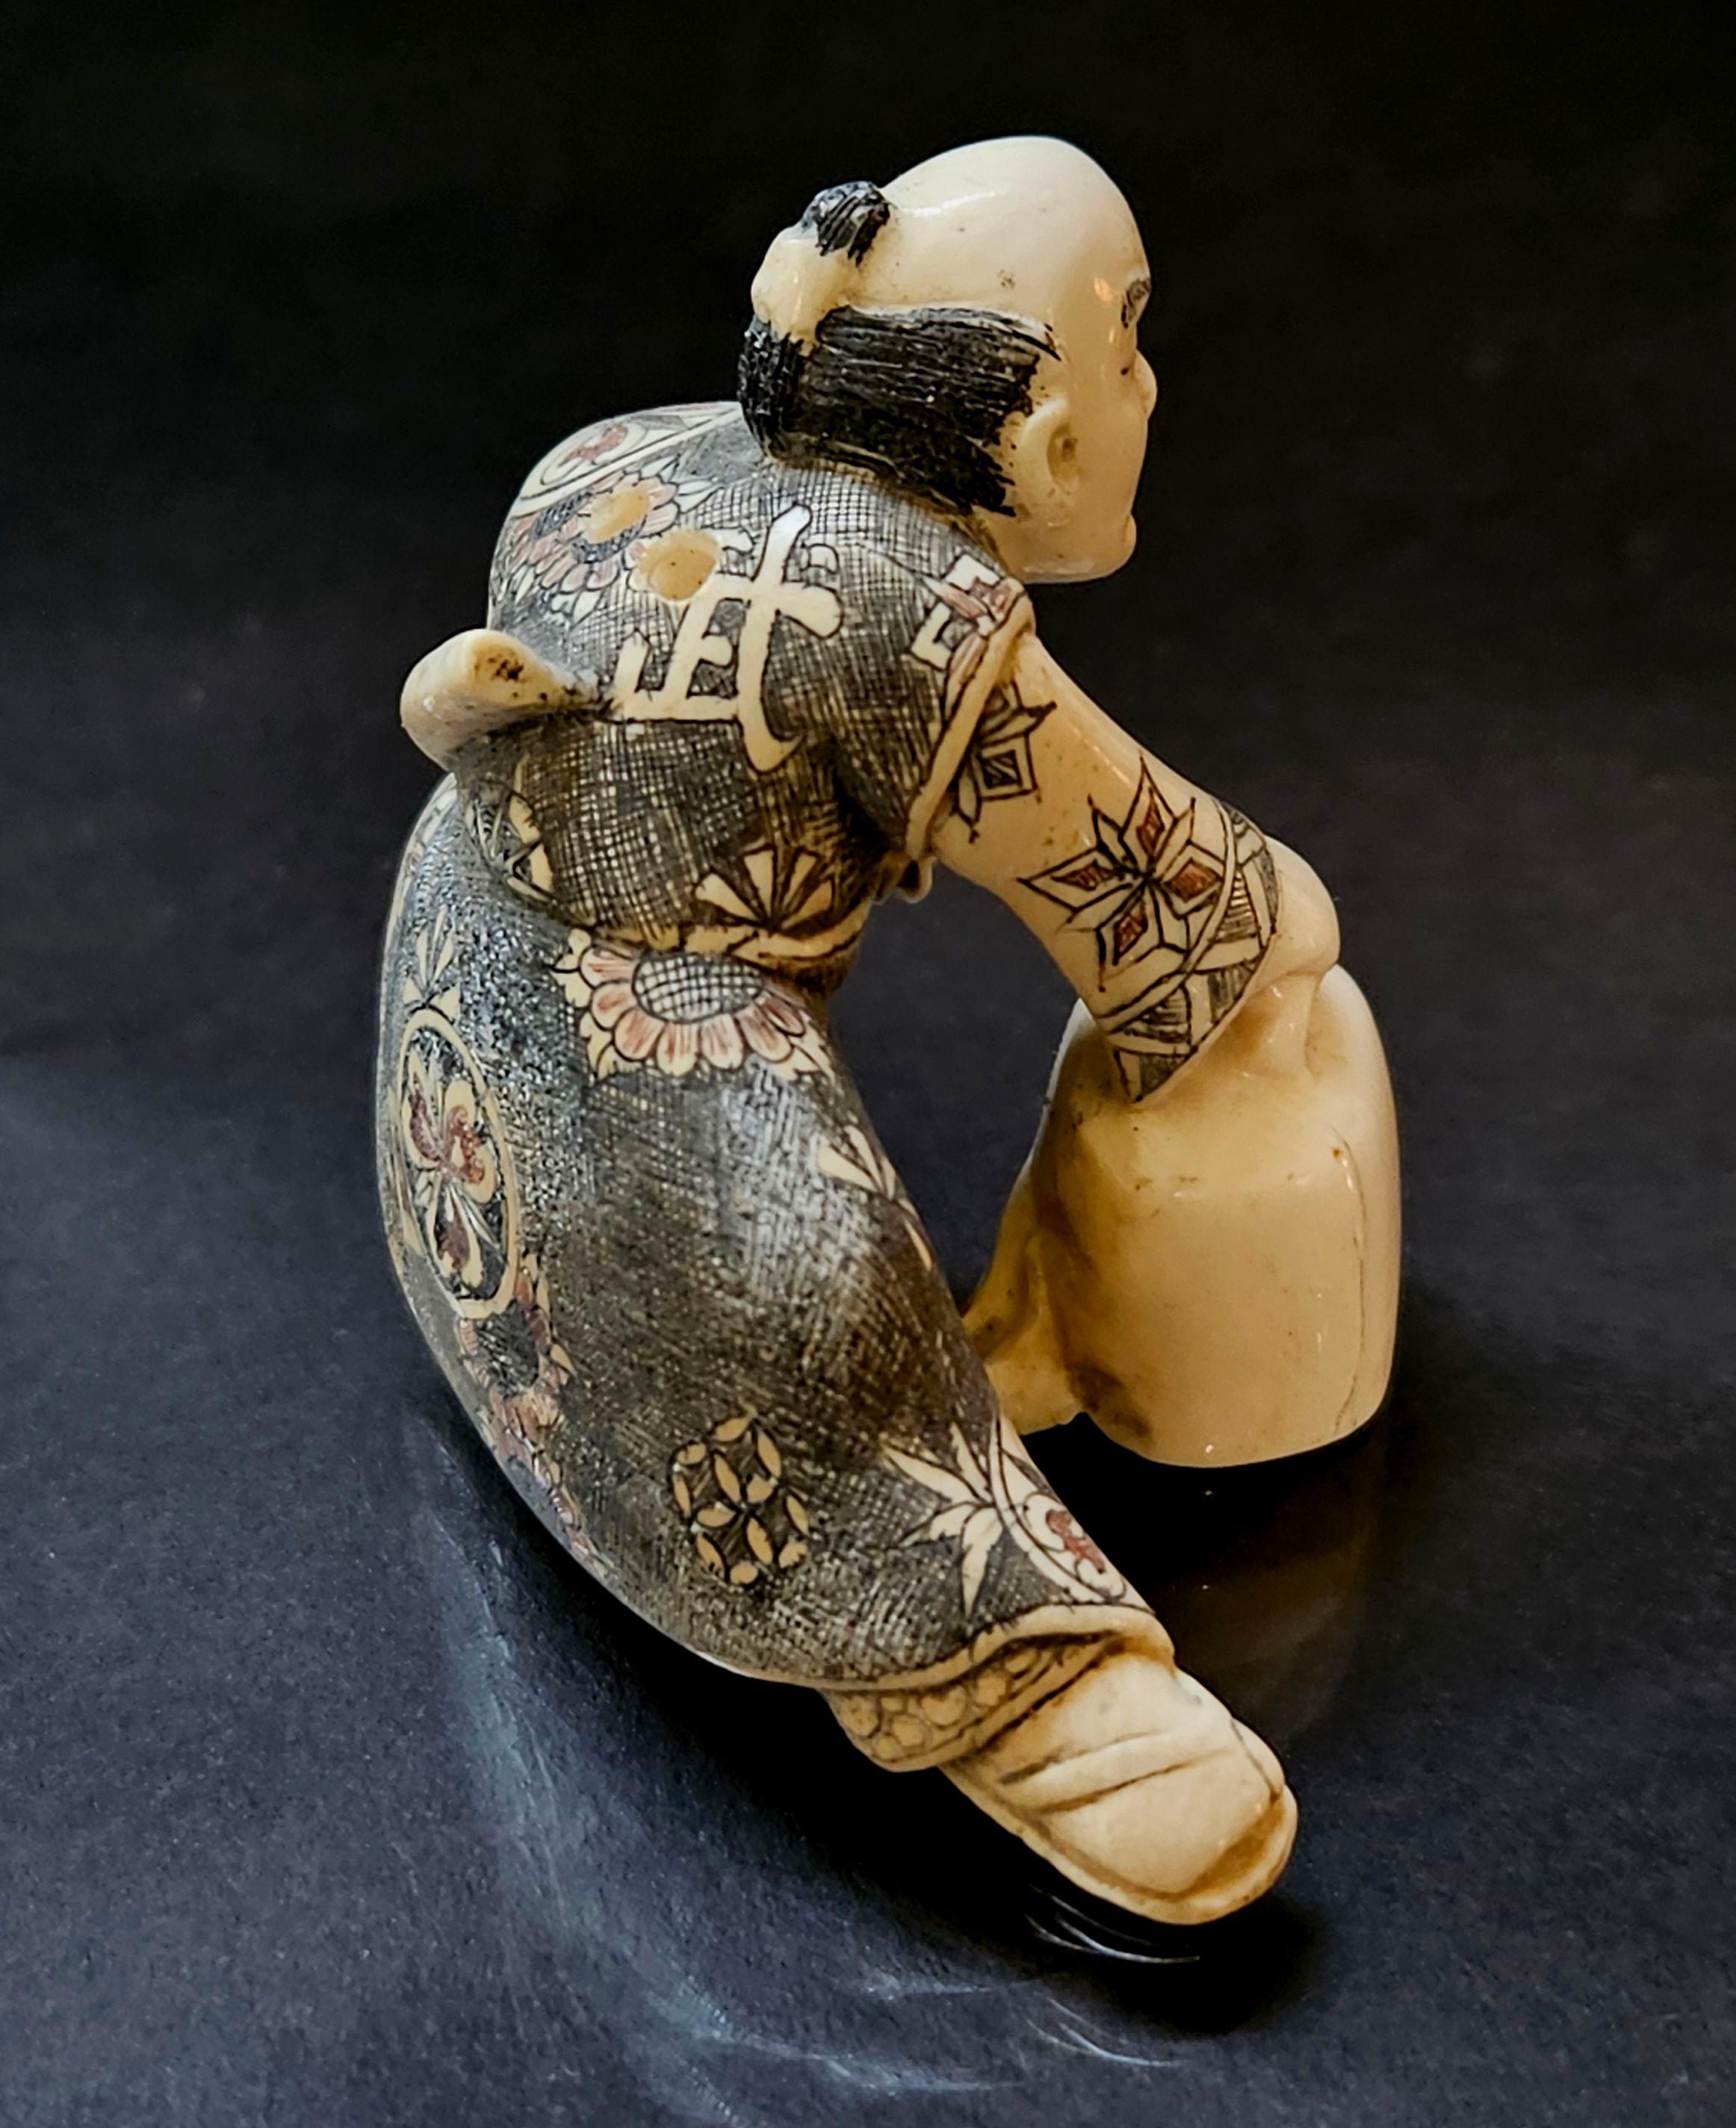 Japanese Carved Netsuke Polychrome Figure by Gyokushi (玉芝), Edo Period In Excellent Condition For Sale In Norton, MA